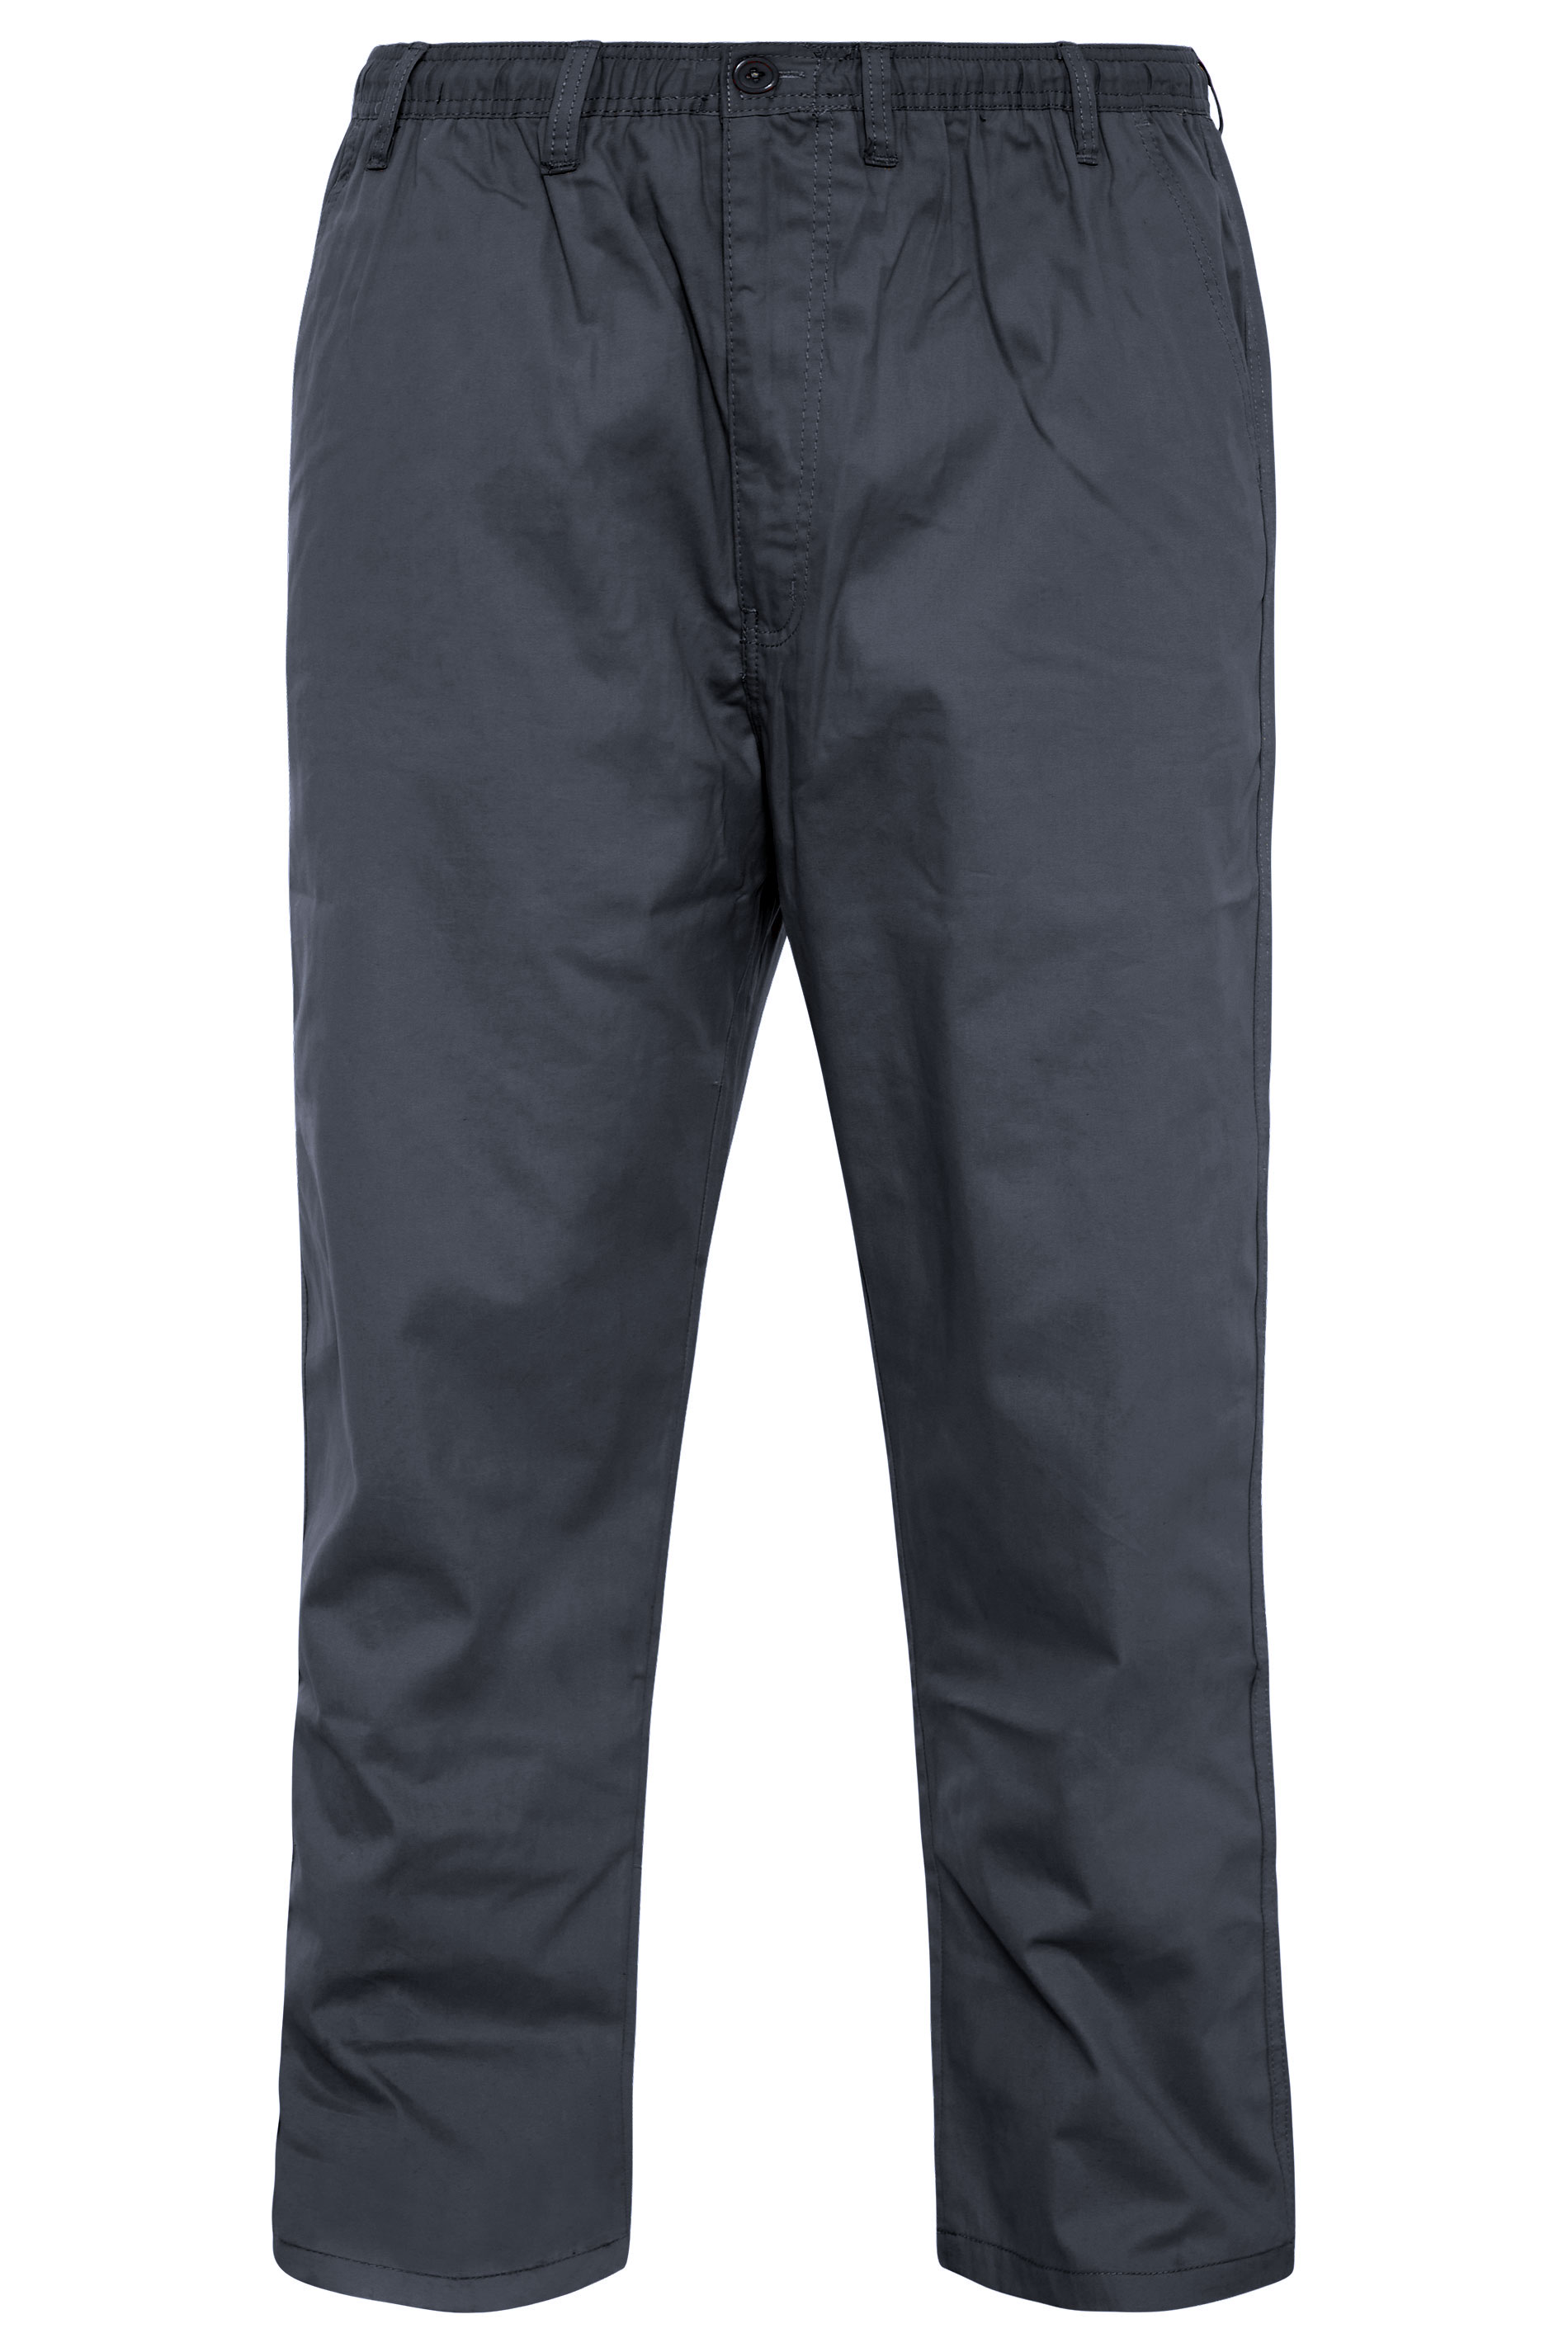 ESPIONAGE Navy Rugby Trousers | BadRhino